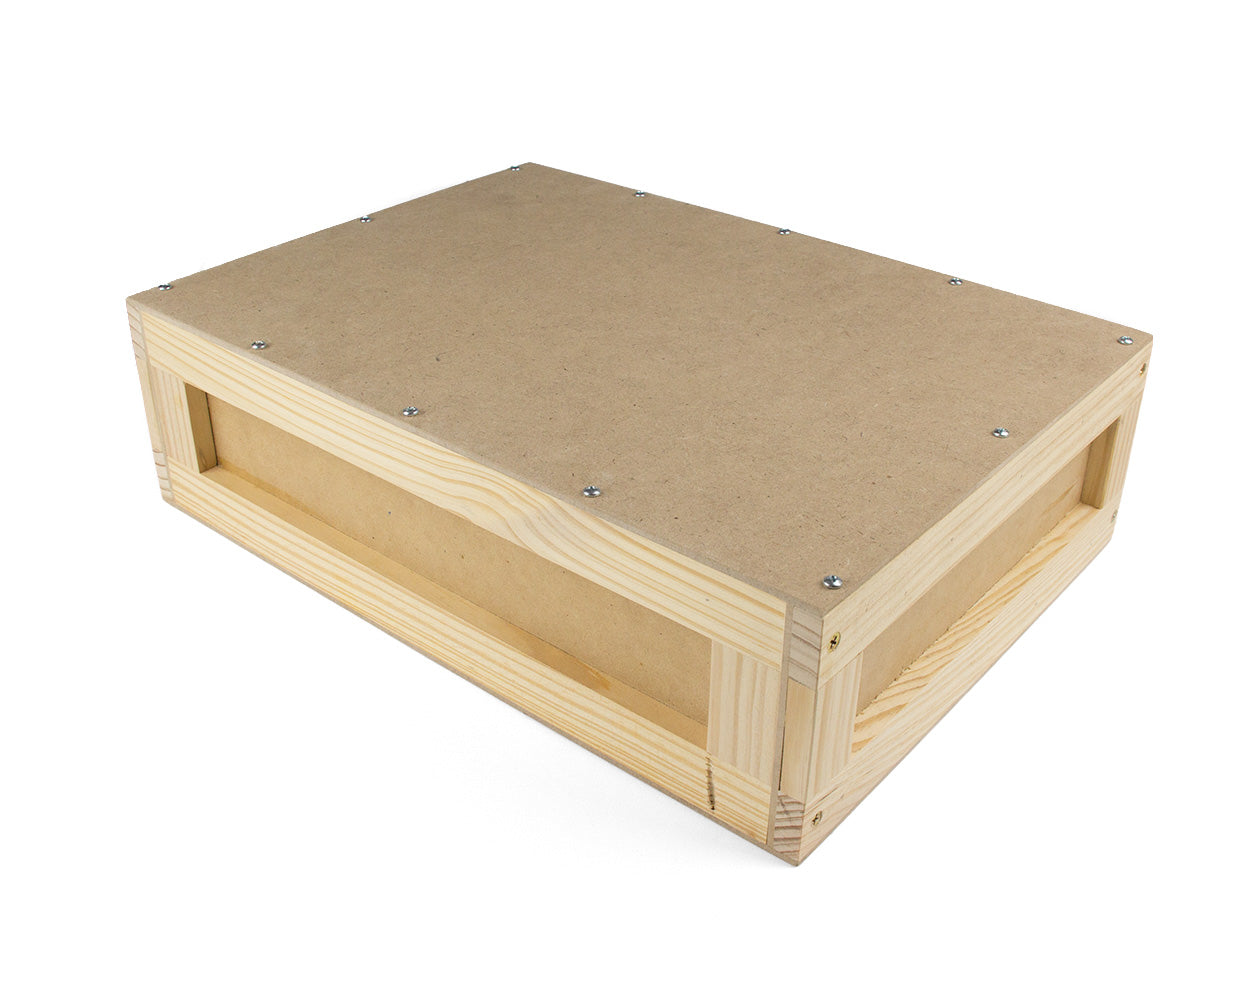 Document Box Shipping Crate